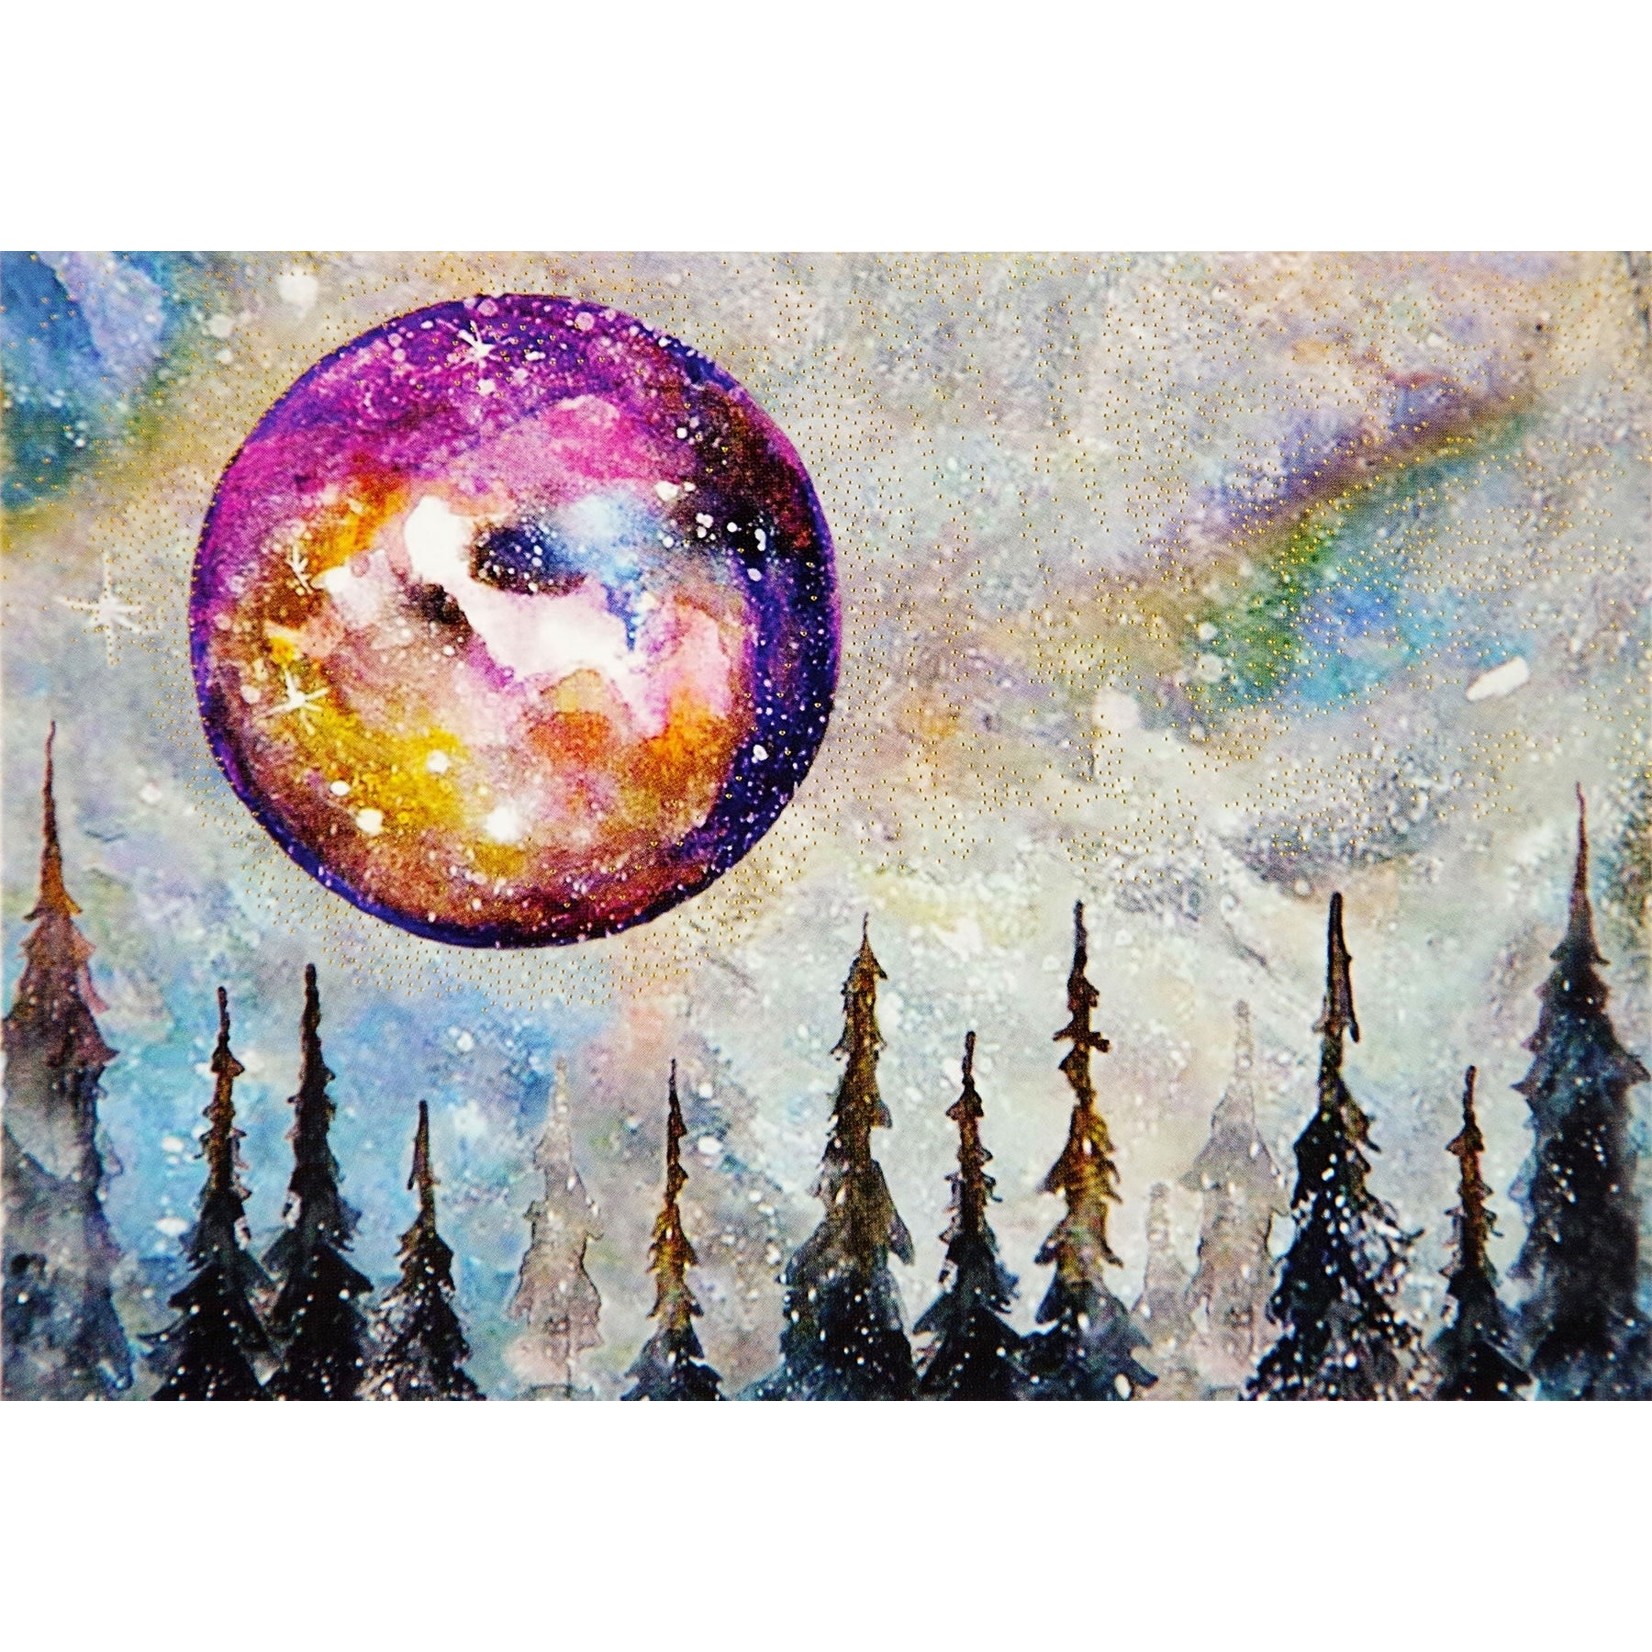 Peter Pauper Press Boxed Note Cards: Mystic Moon